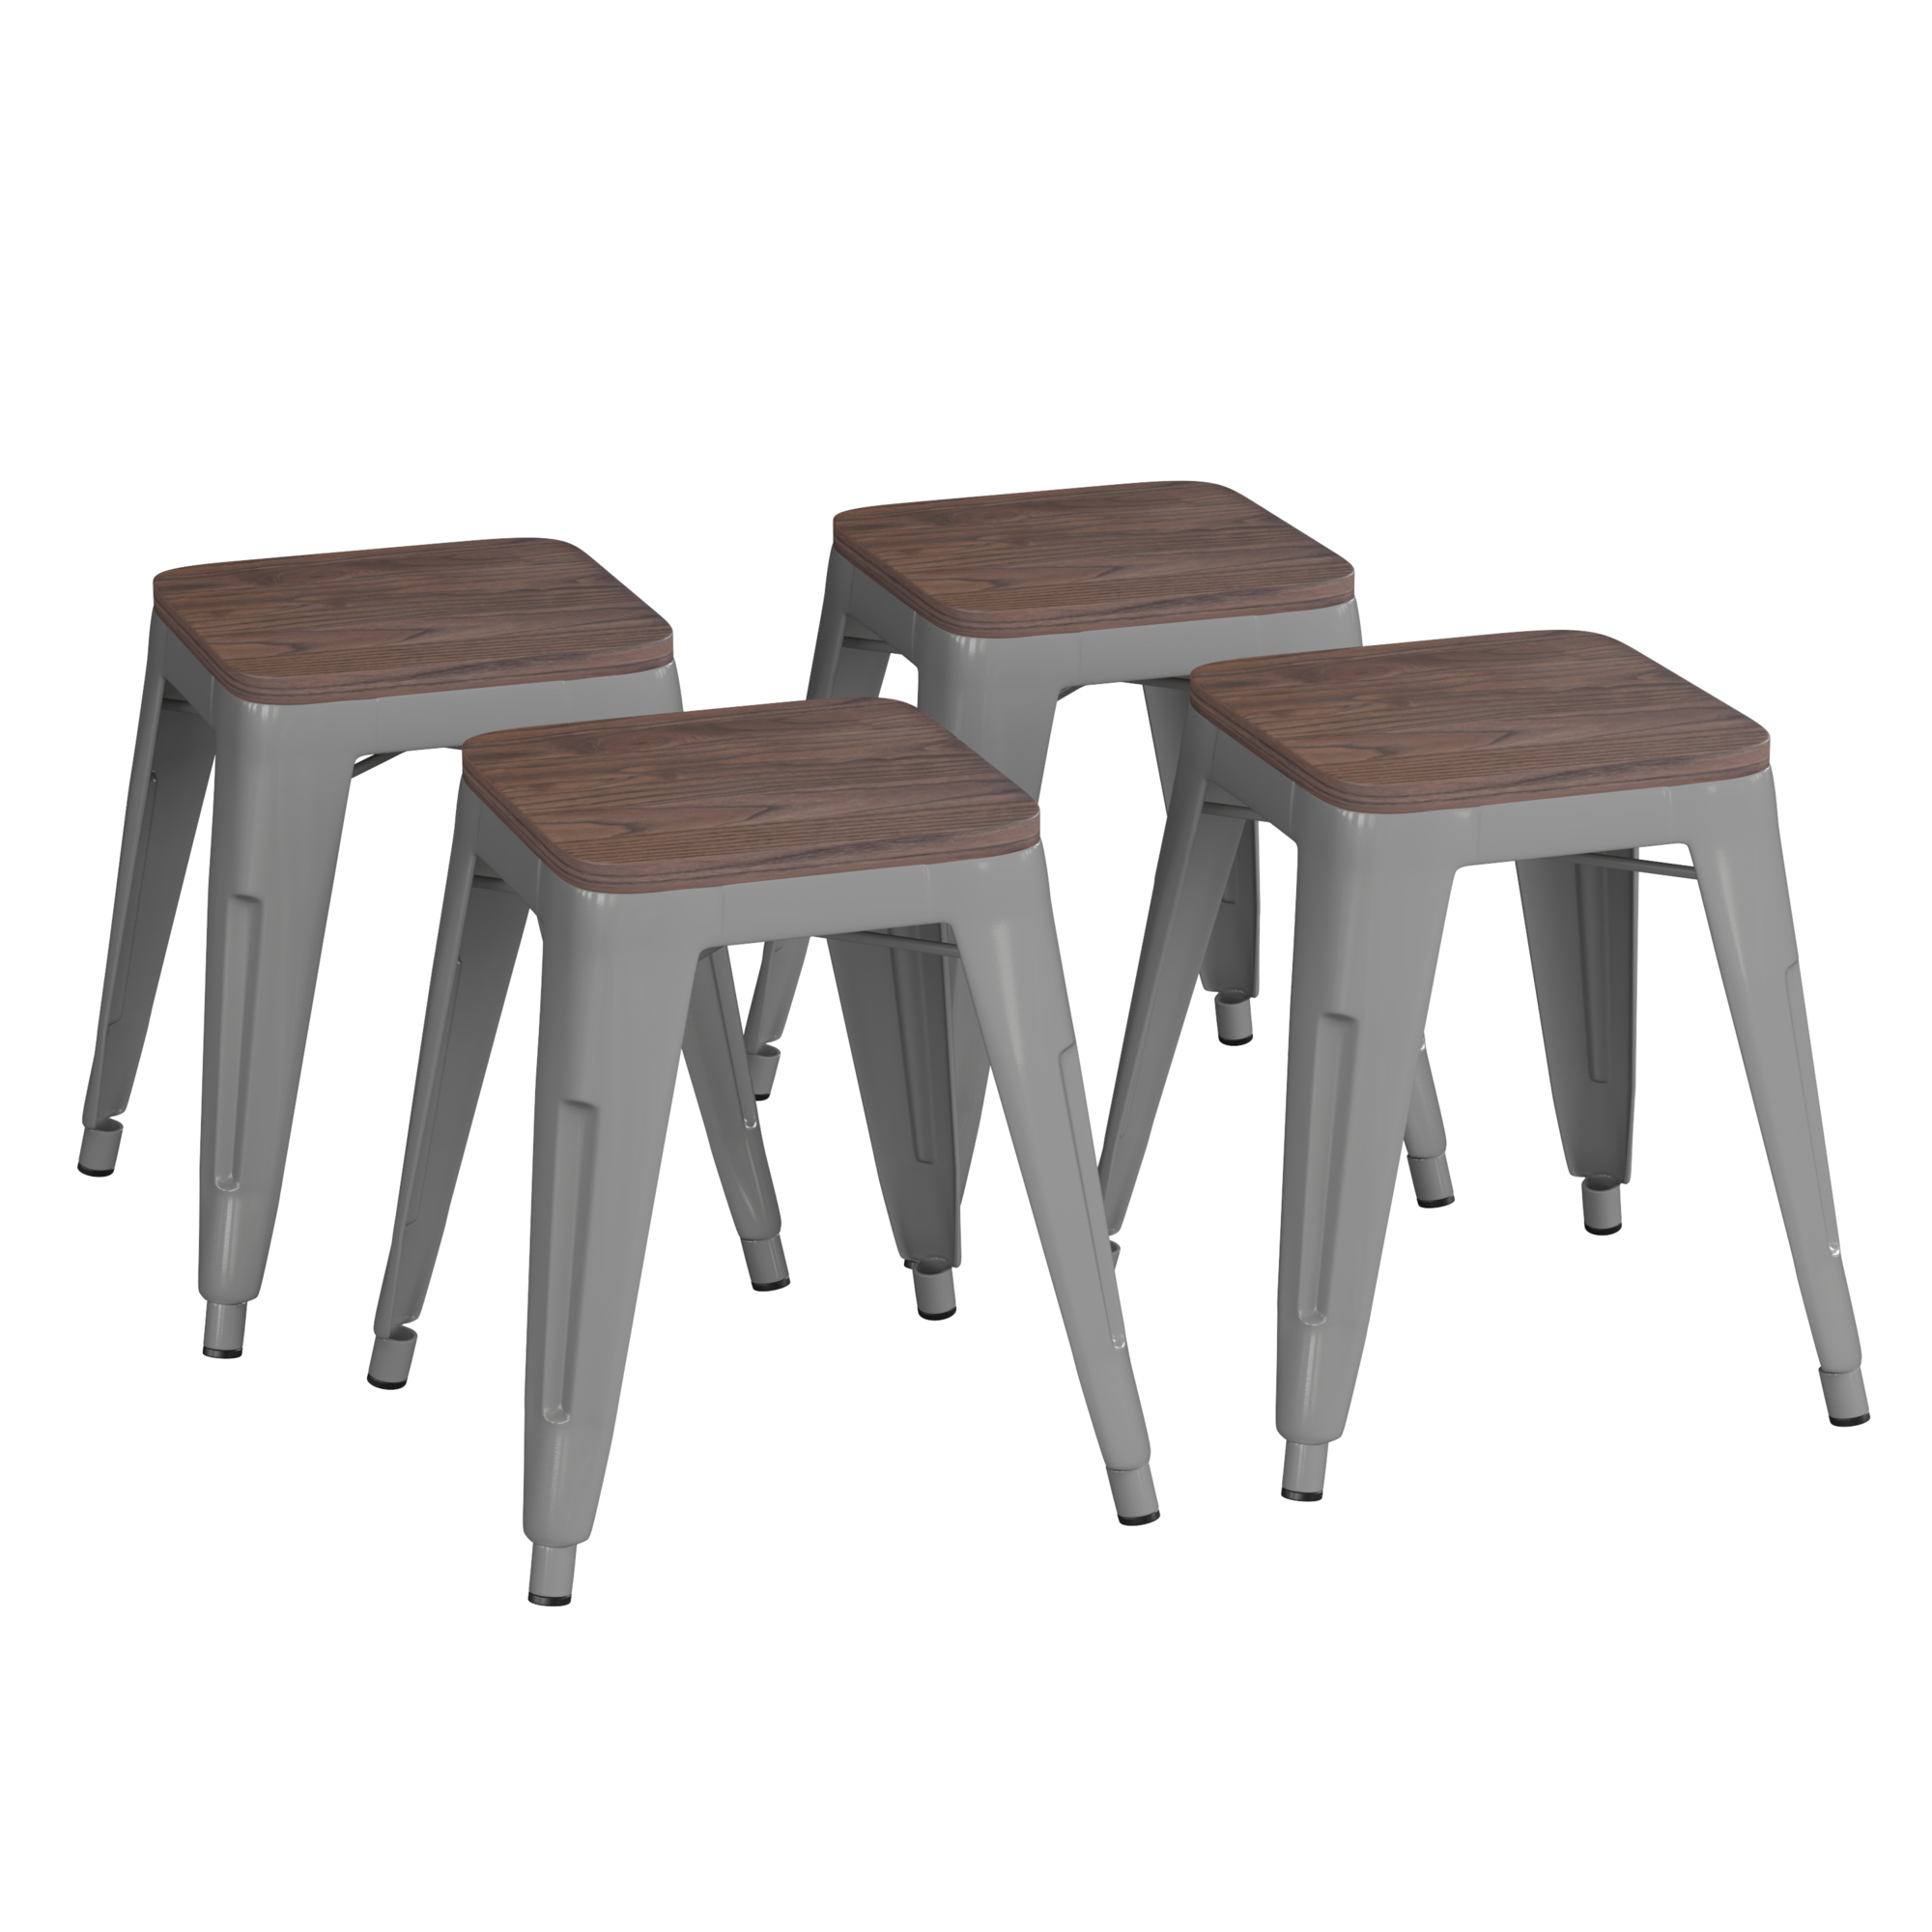 Flash Furniture, 4 Pack 18Inch Silver Metal Stool with Wood Seat, Primary Color Gray, Included (qty.) 4, Model ETBT350318SILWD